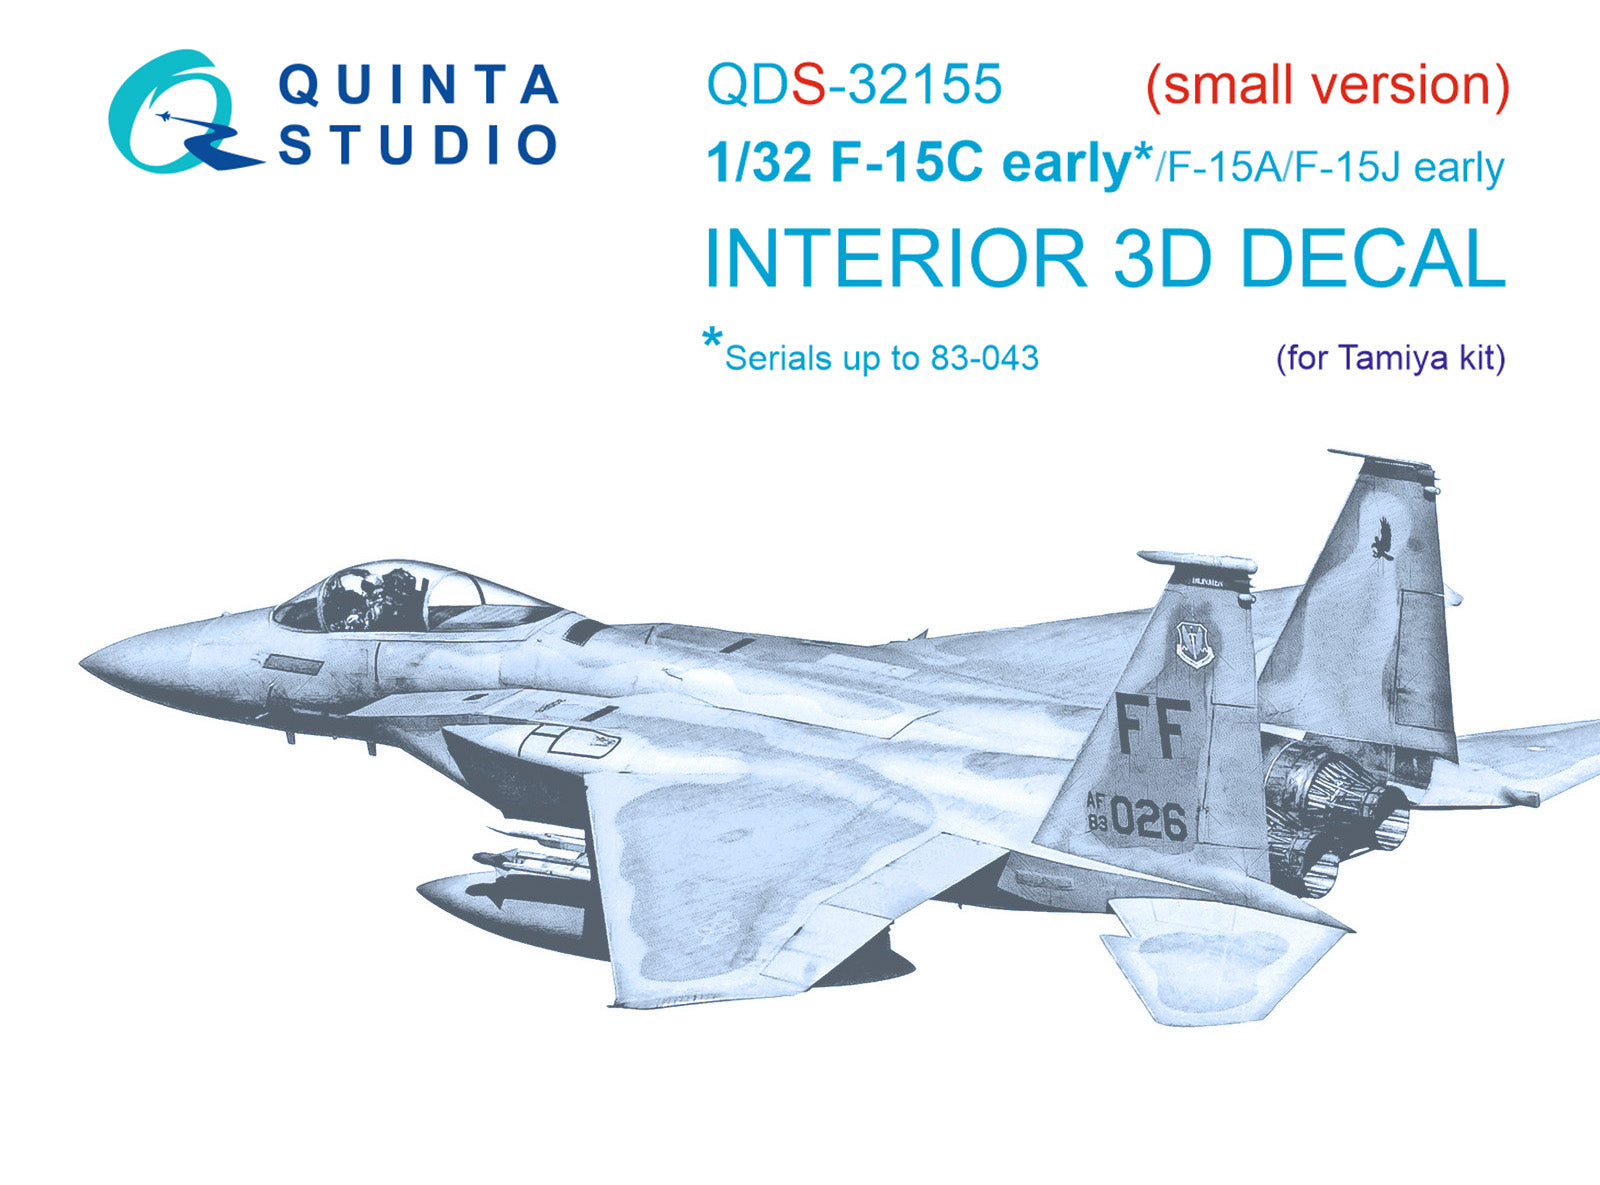 Quinta Studio - 1/32 F-15C early/F-15A/F-15J early QDS-32155 for Tamiya kit (small version)